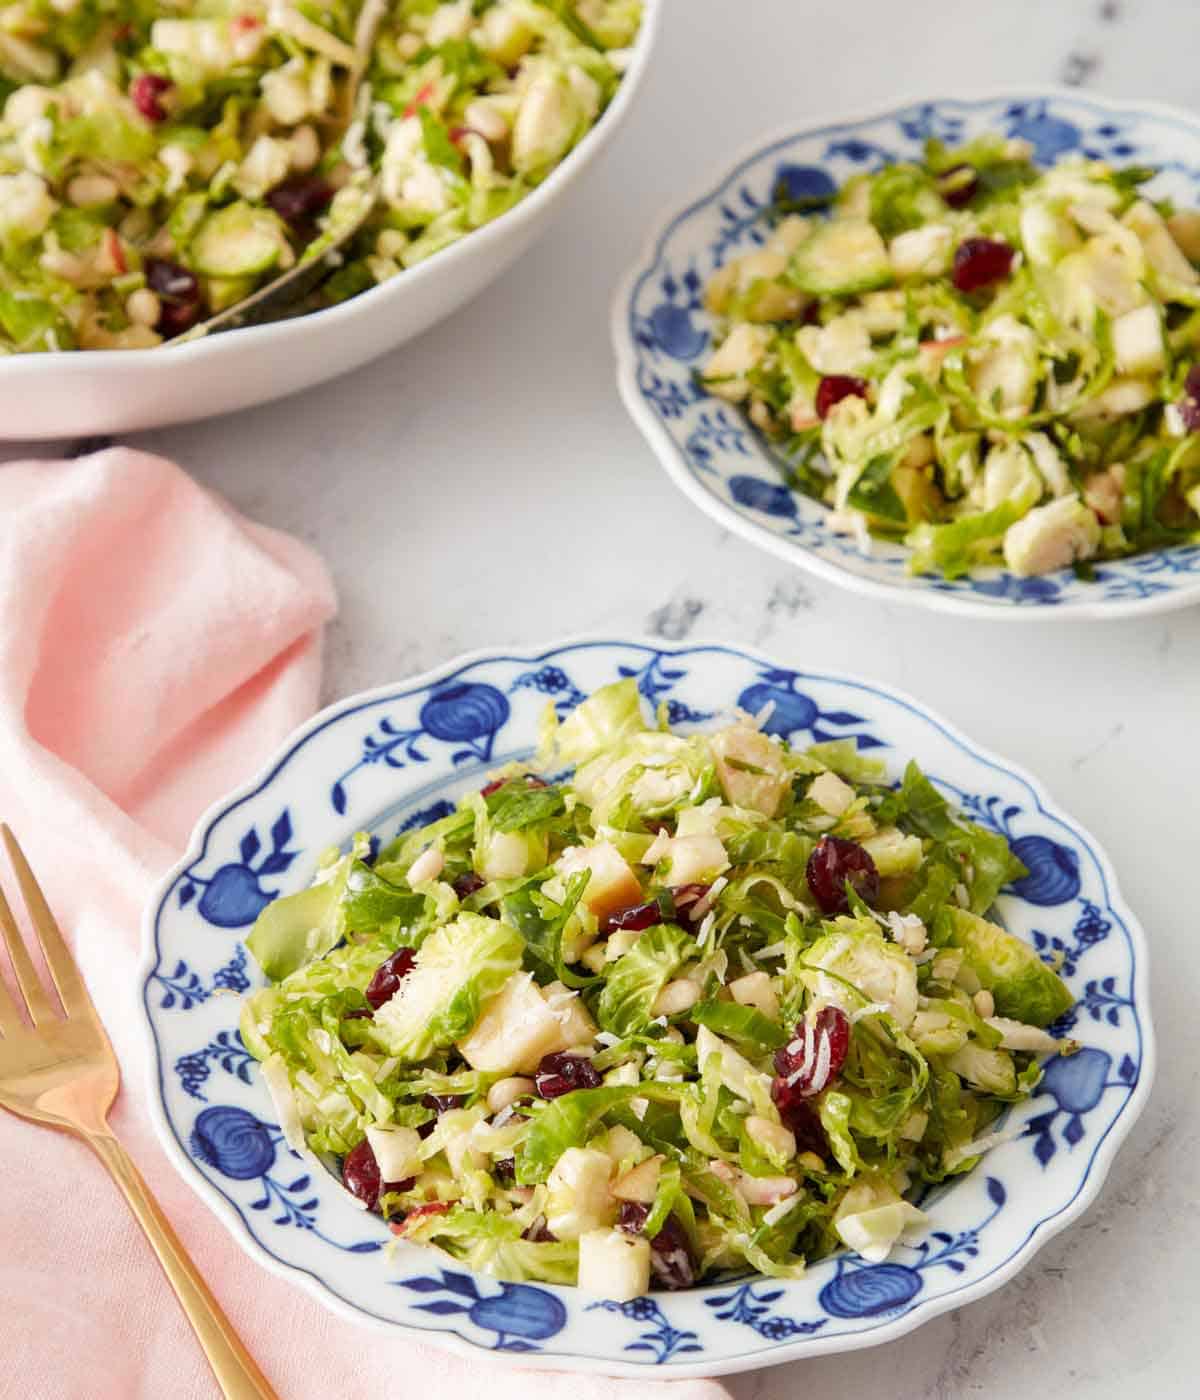 Two plates of Brussels sprout salad with a serving bowl in the background.